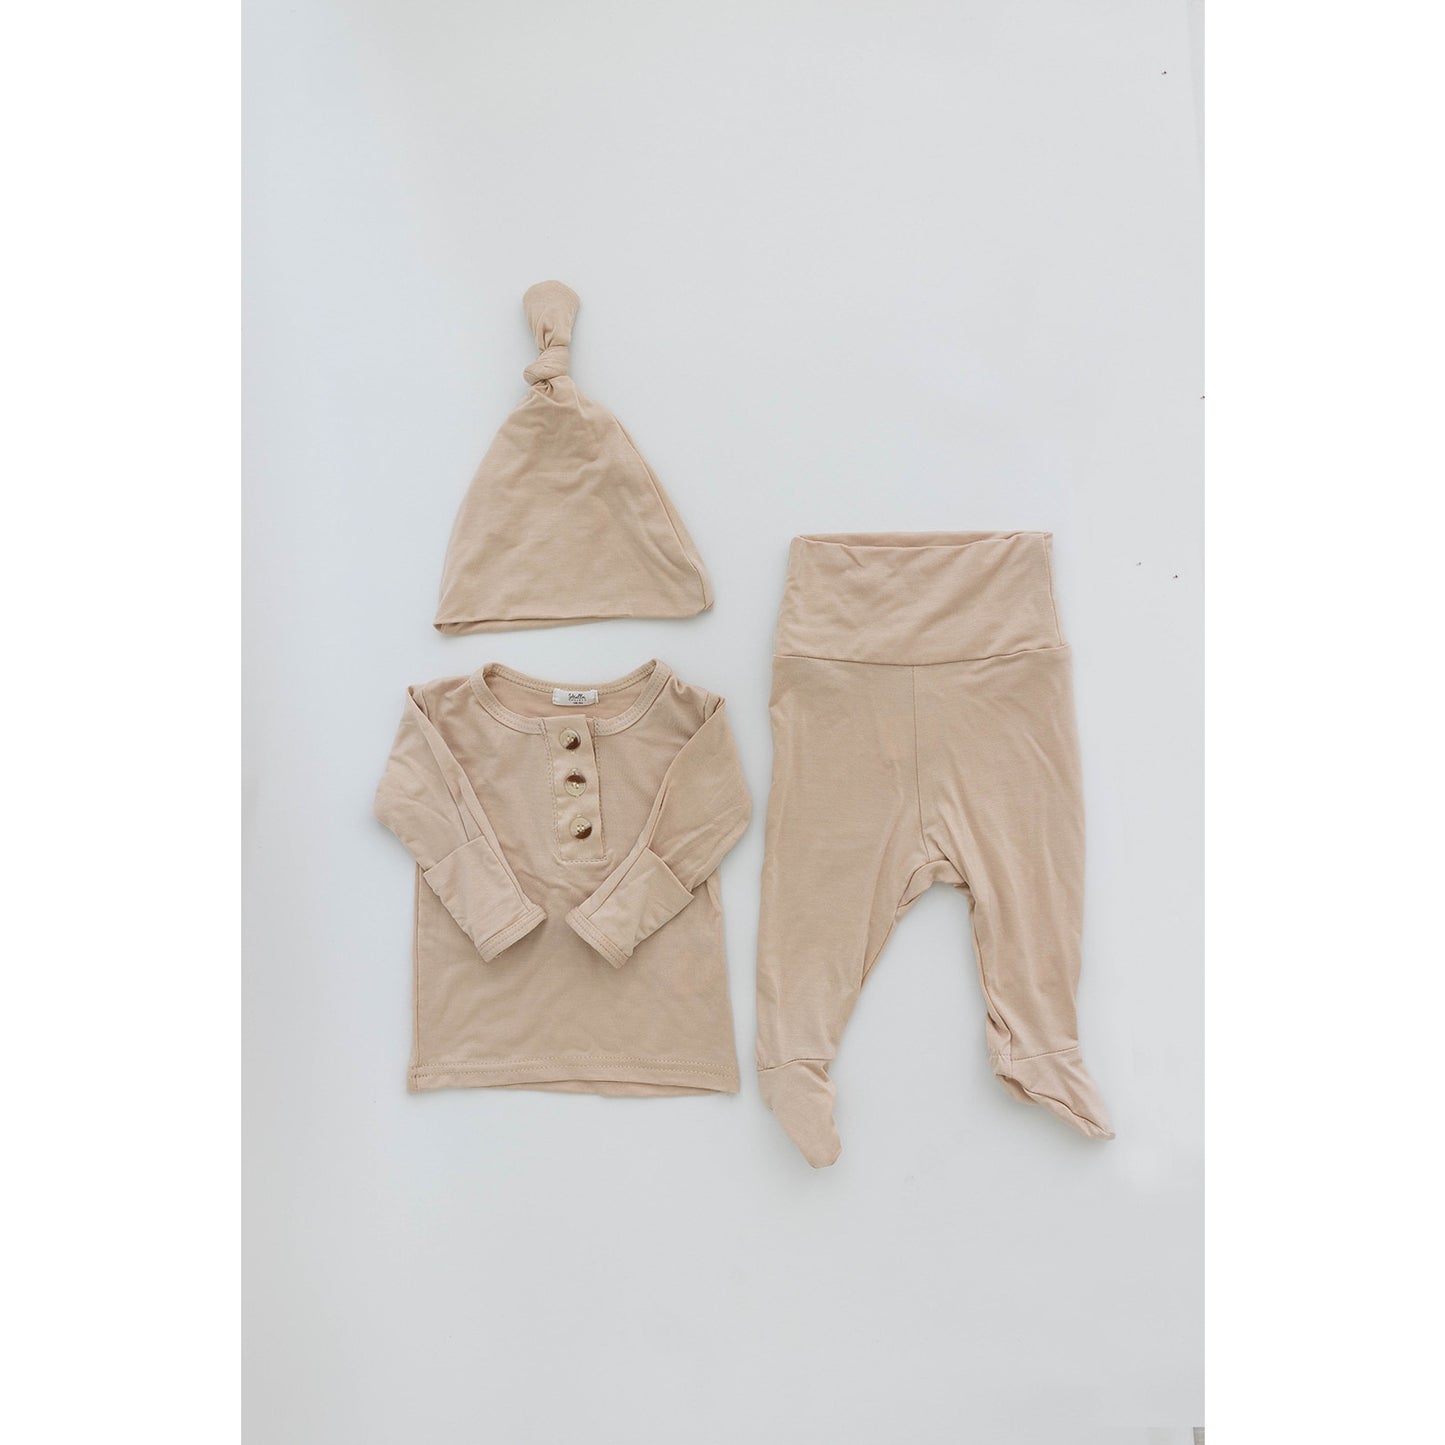 Baby Top & Bottom Outfit - Navy, Black, Camel, Pink, Sand, White